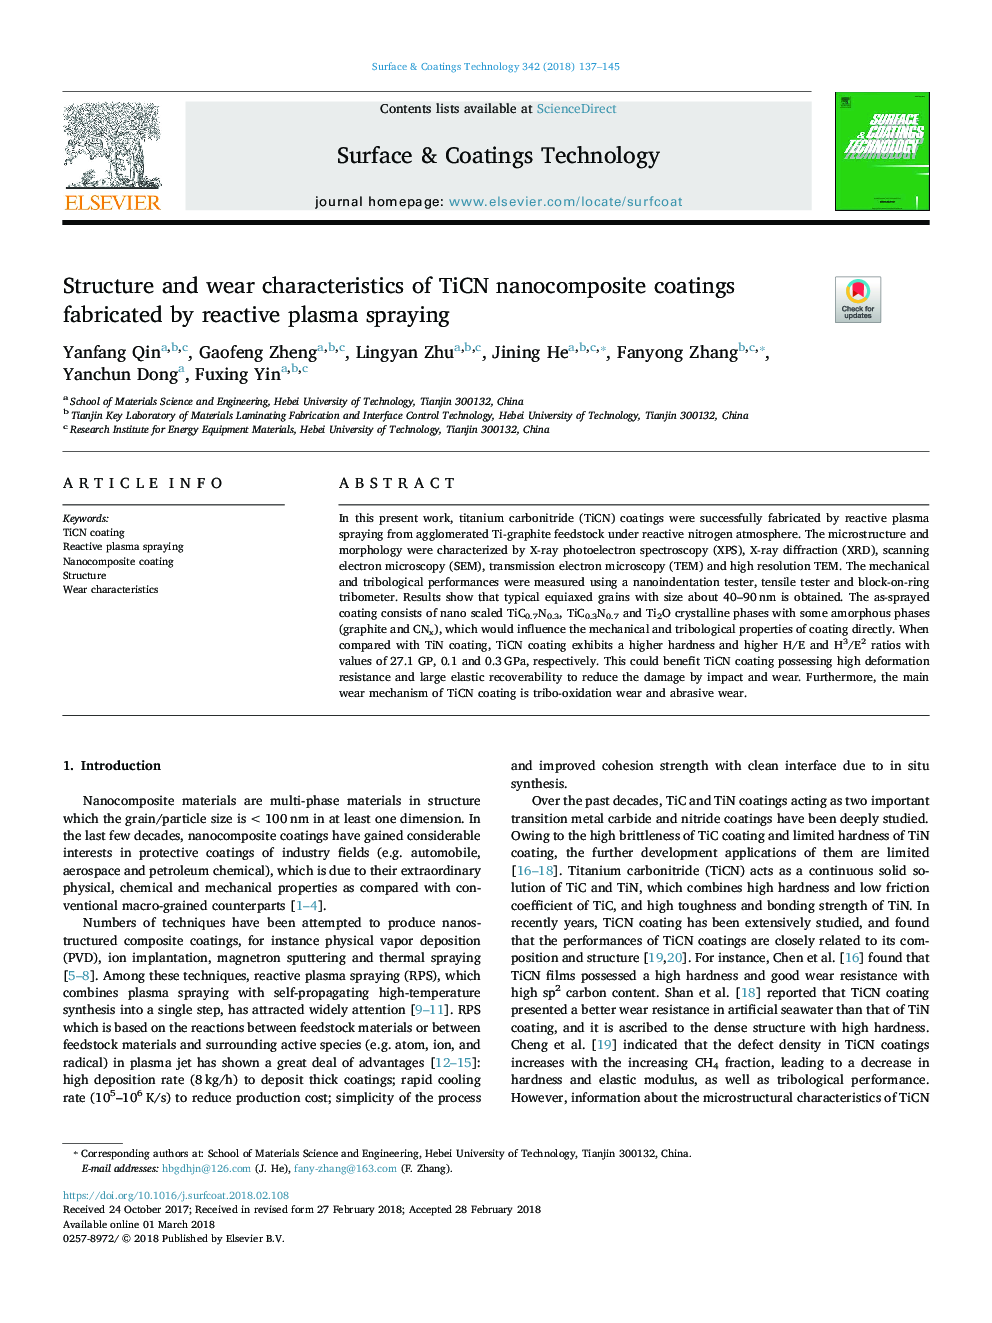 Structure and wear characteristics of TiCN nanocomposite coatings fabricated by reactive plasma spraying